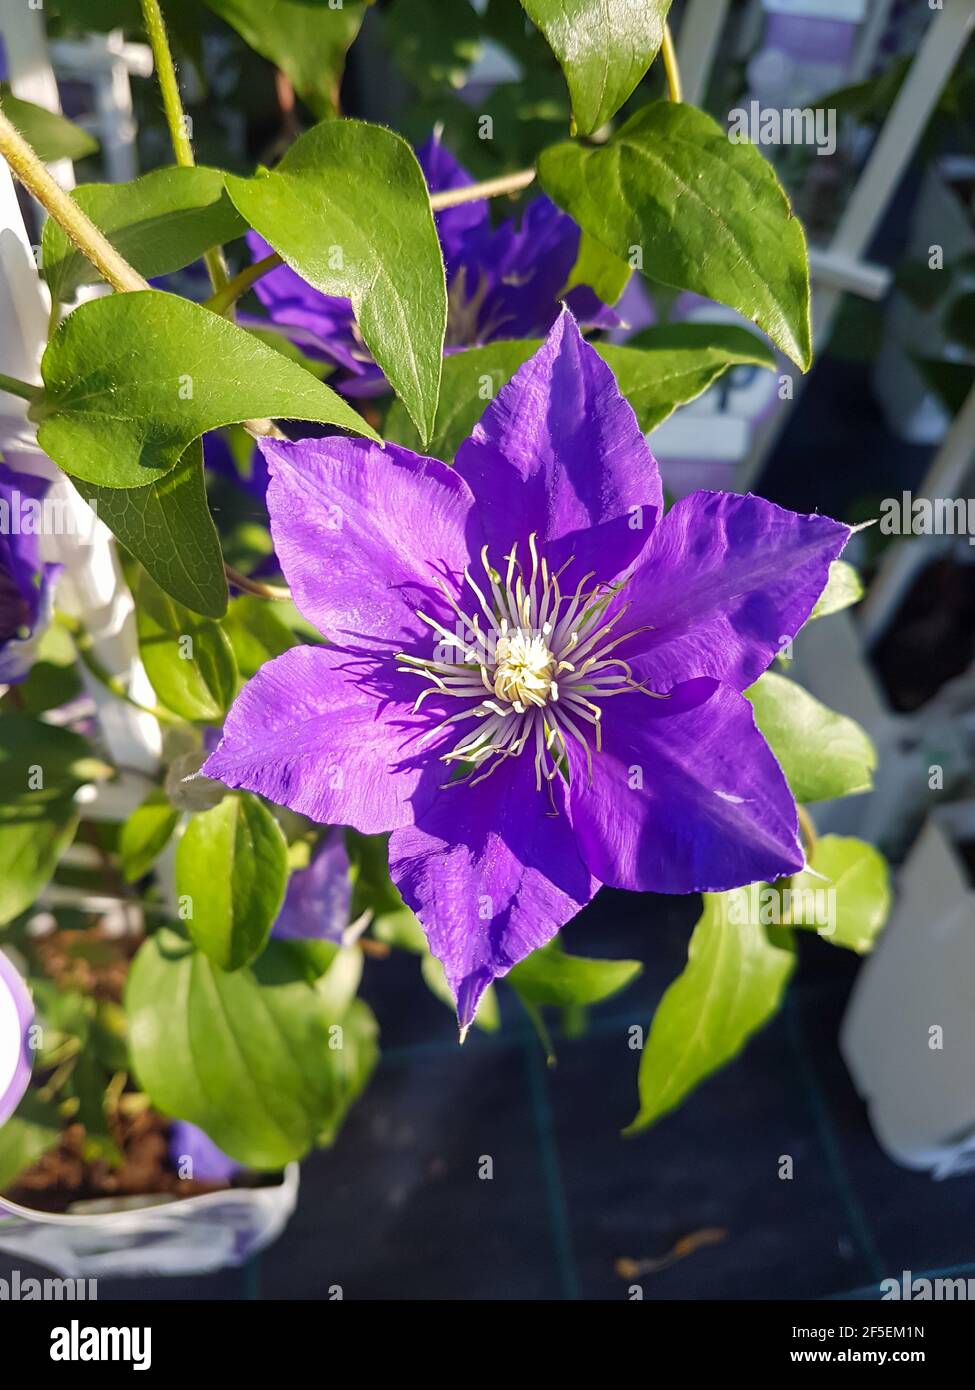 Beautiful clematis flower in the greenhouse close-up Coriflora or Atragene plants background Stock Photo